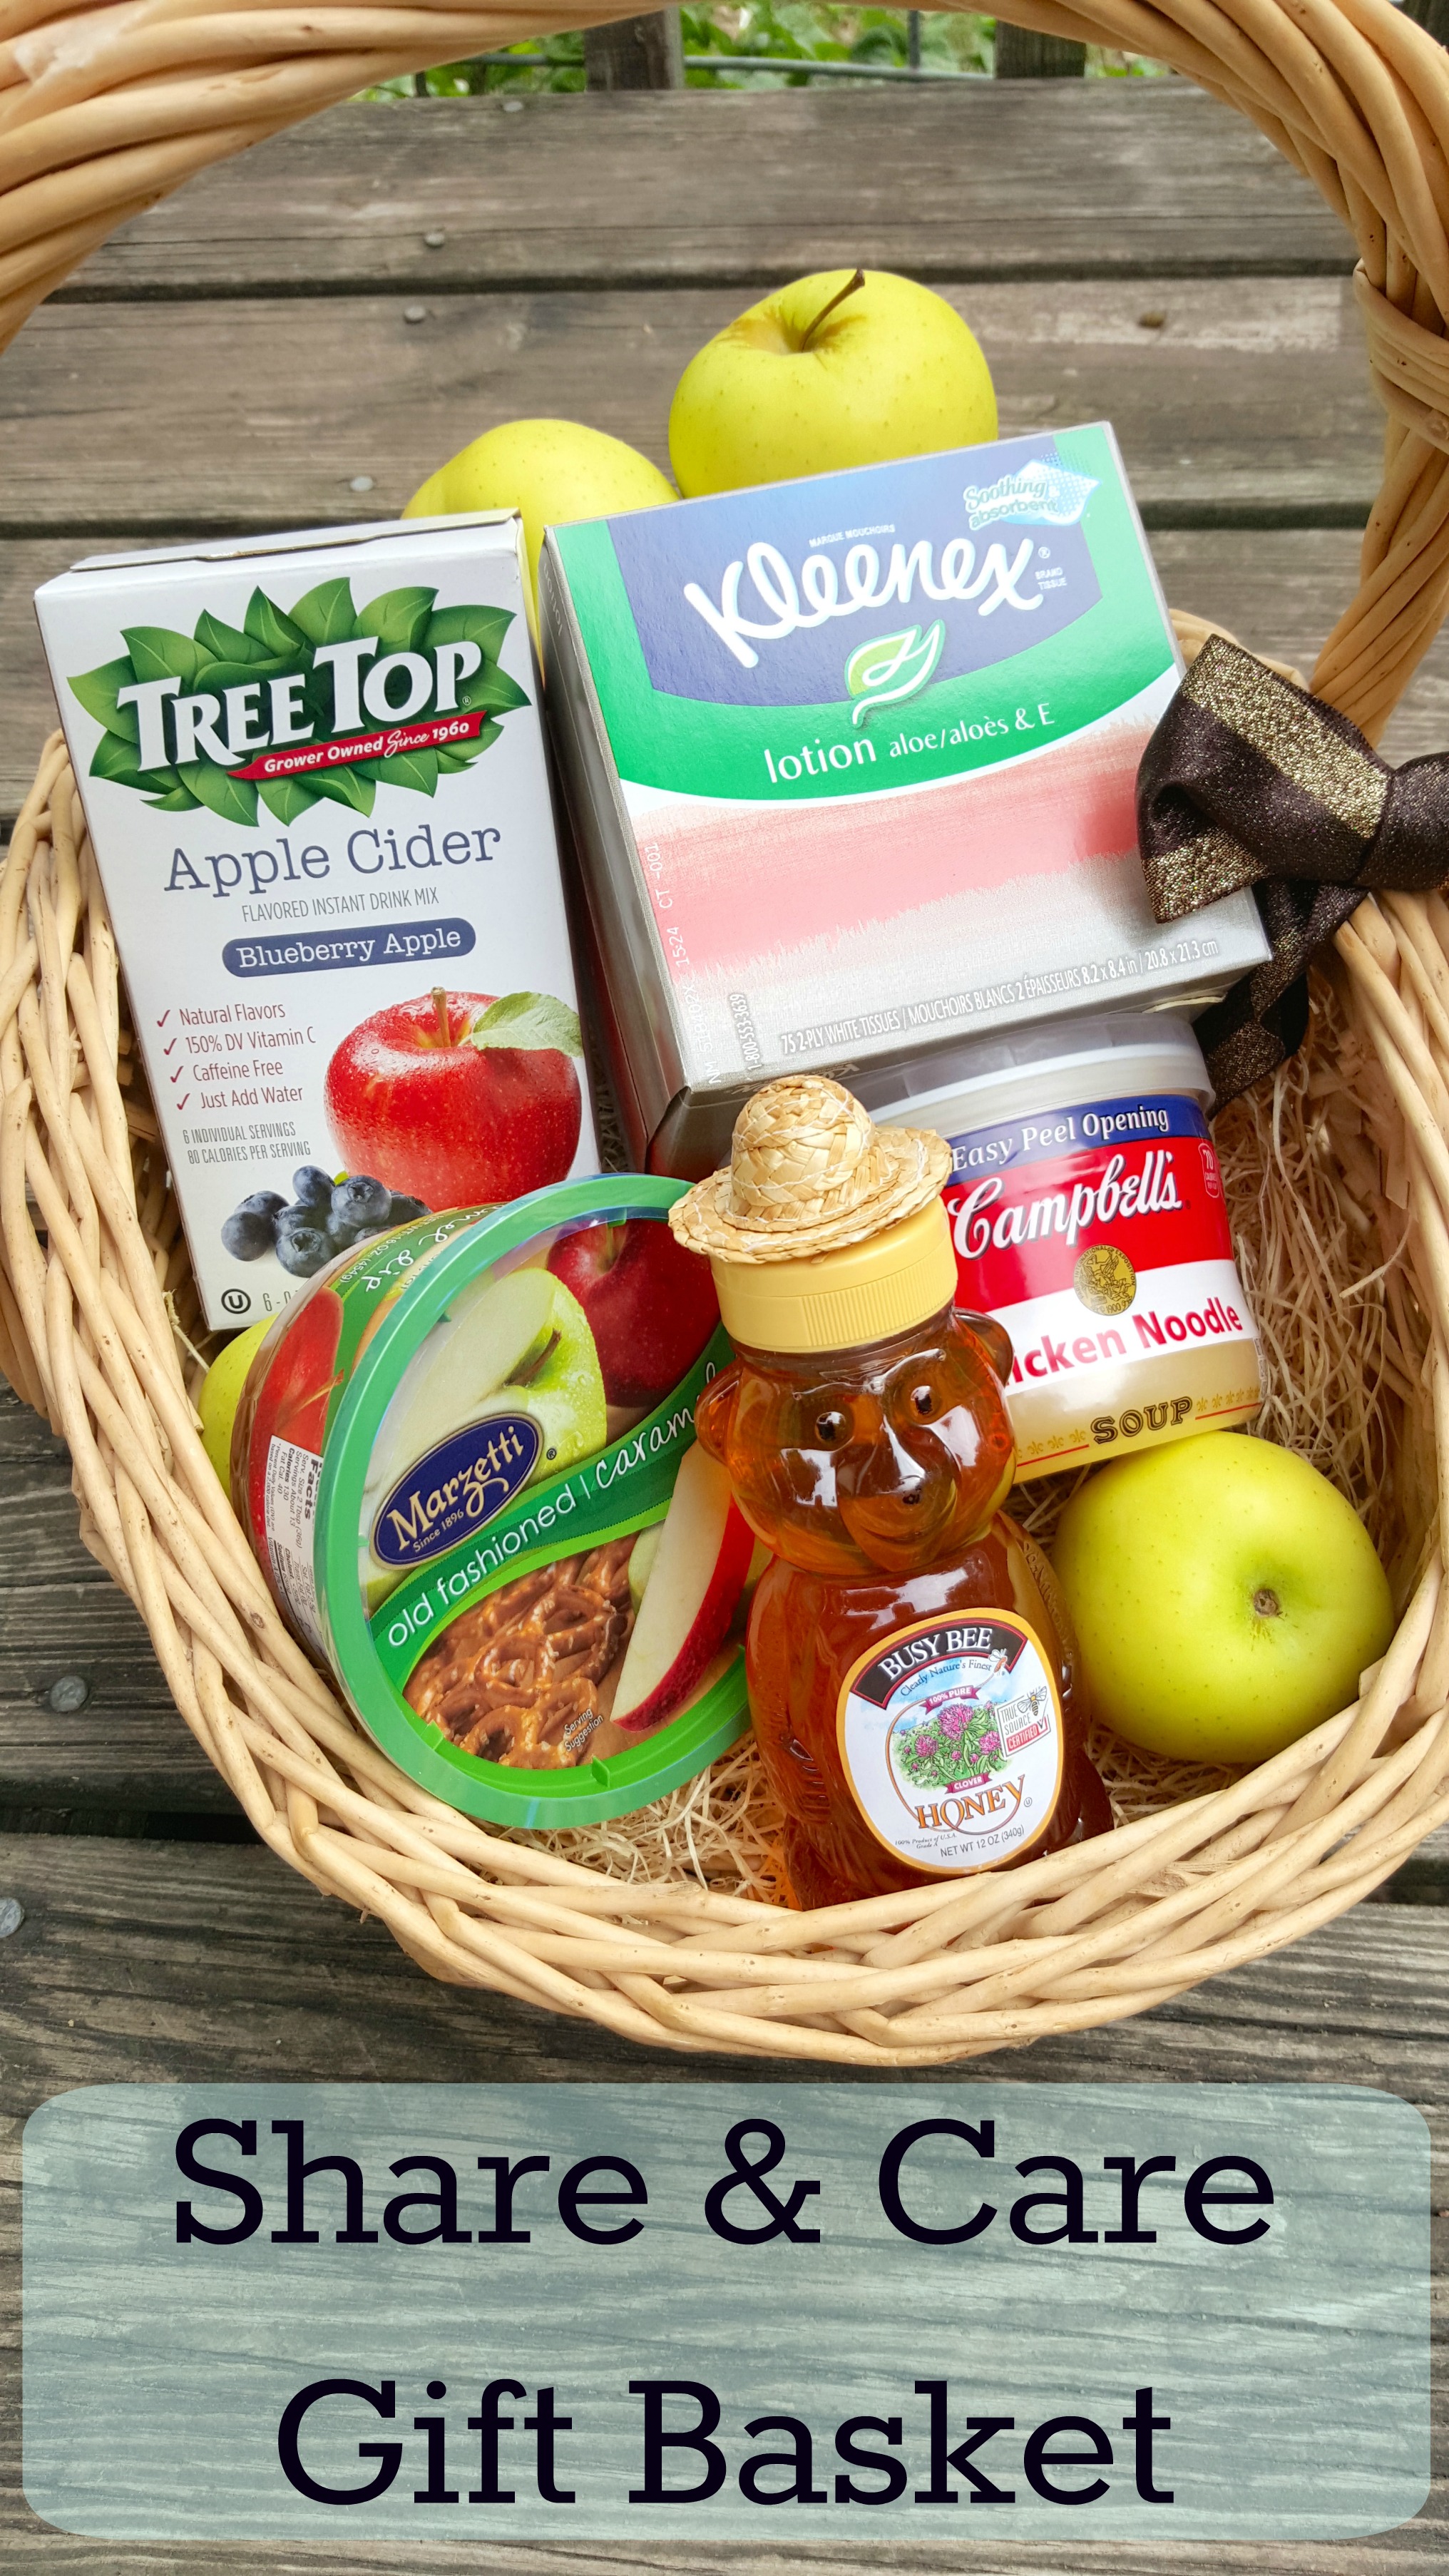 Share & Care Gift Basket with Kleenex Facial Tissue